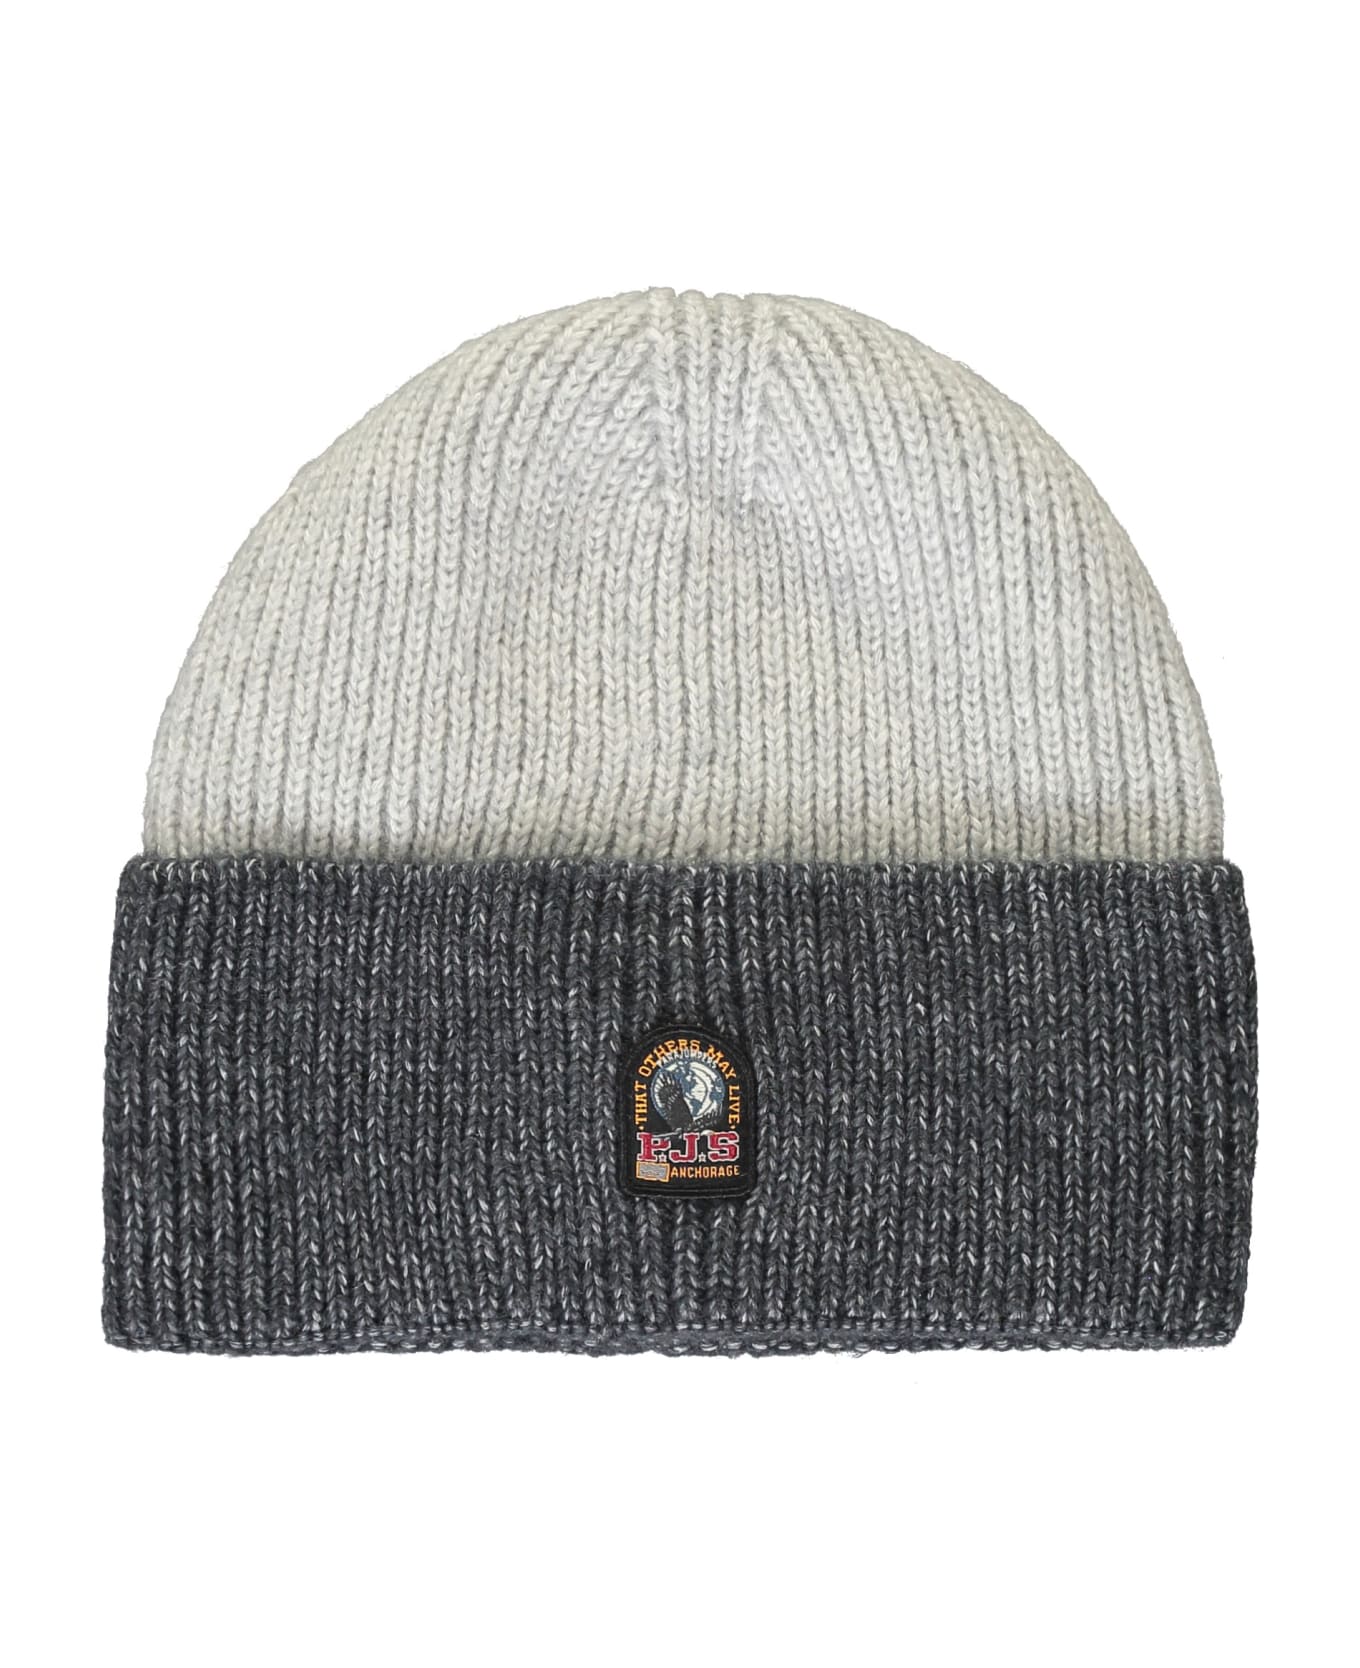 Parajumpers Ribbed Knit Beanie - grey